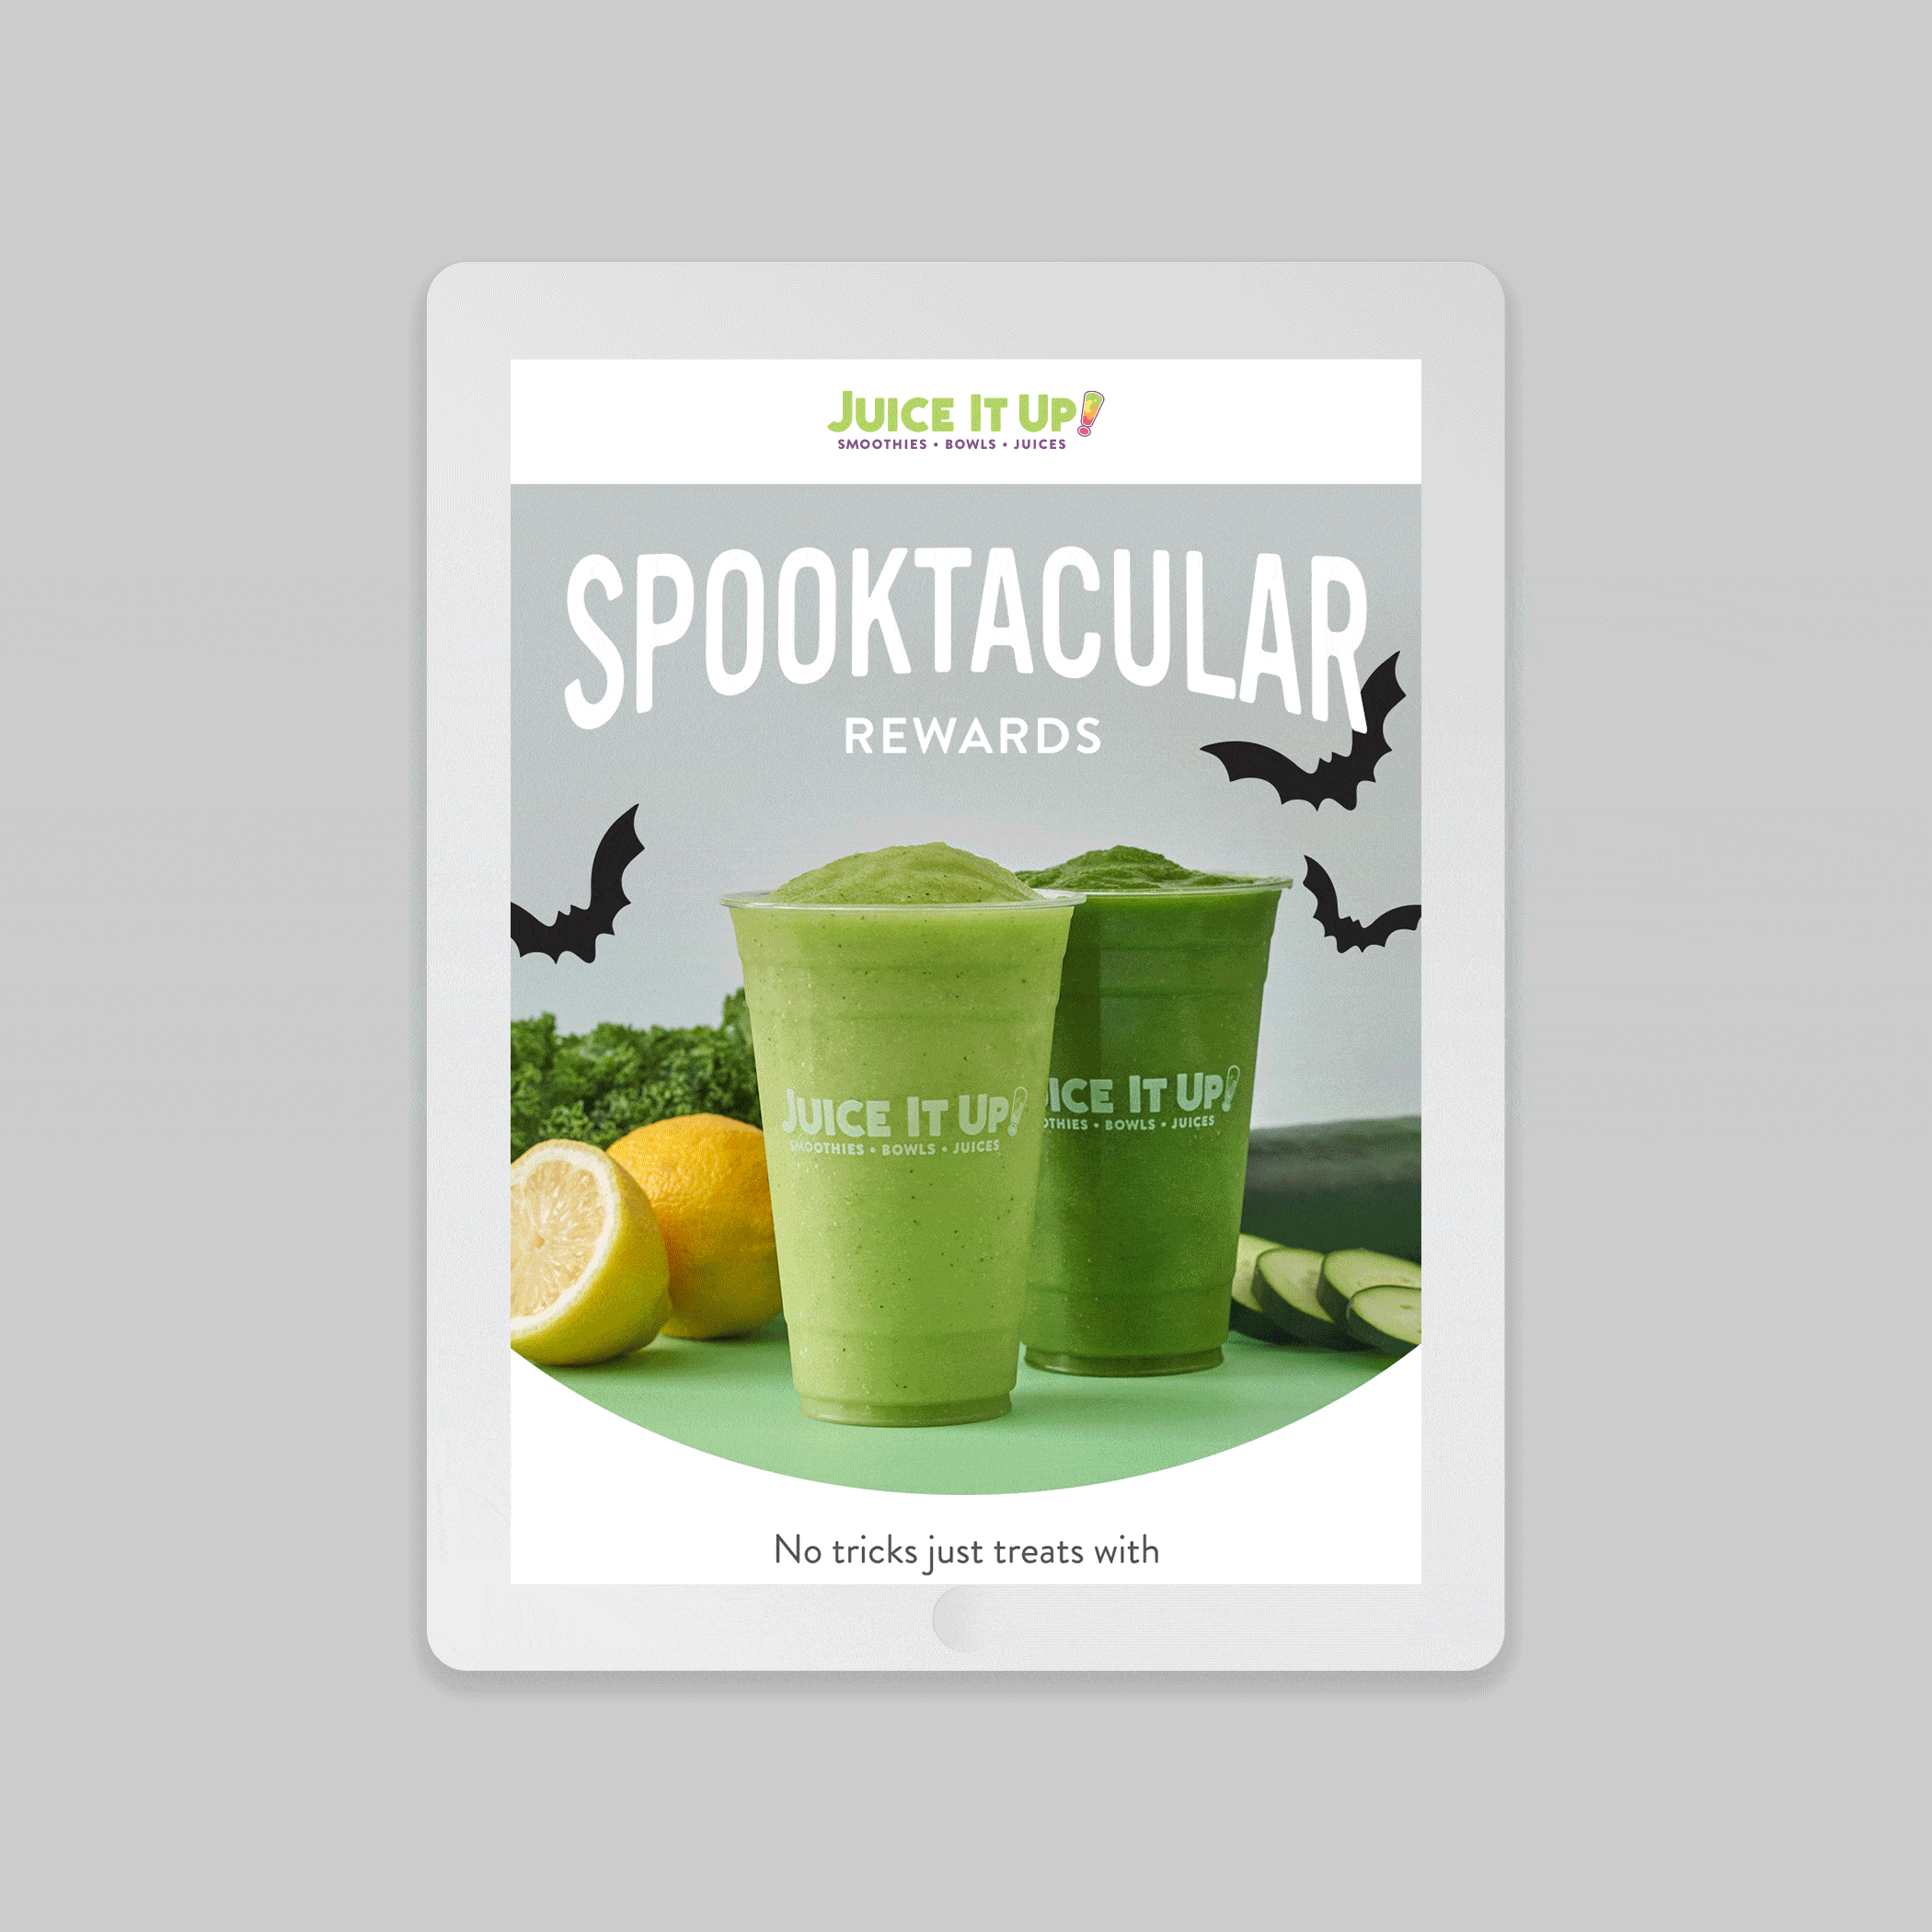 Halloween Email Design for Juice It Up! By Stellen Design brand design agency in Los Angeles